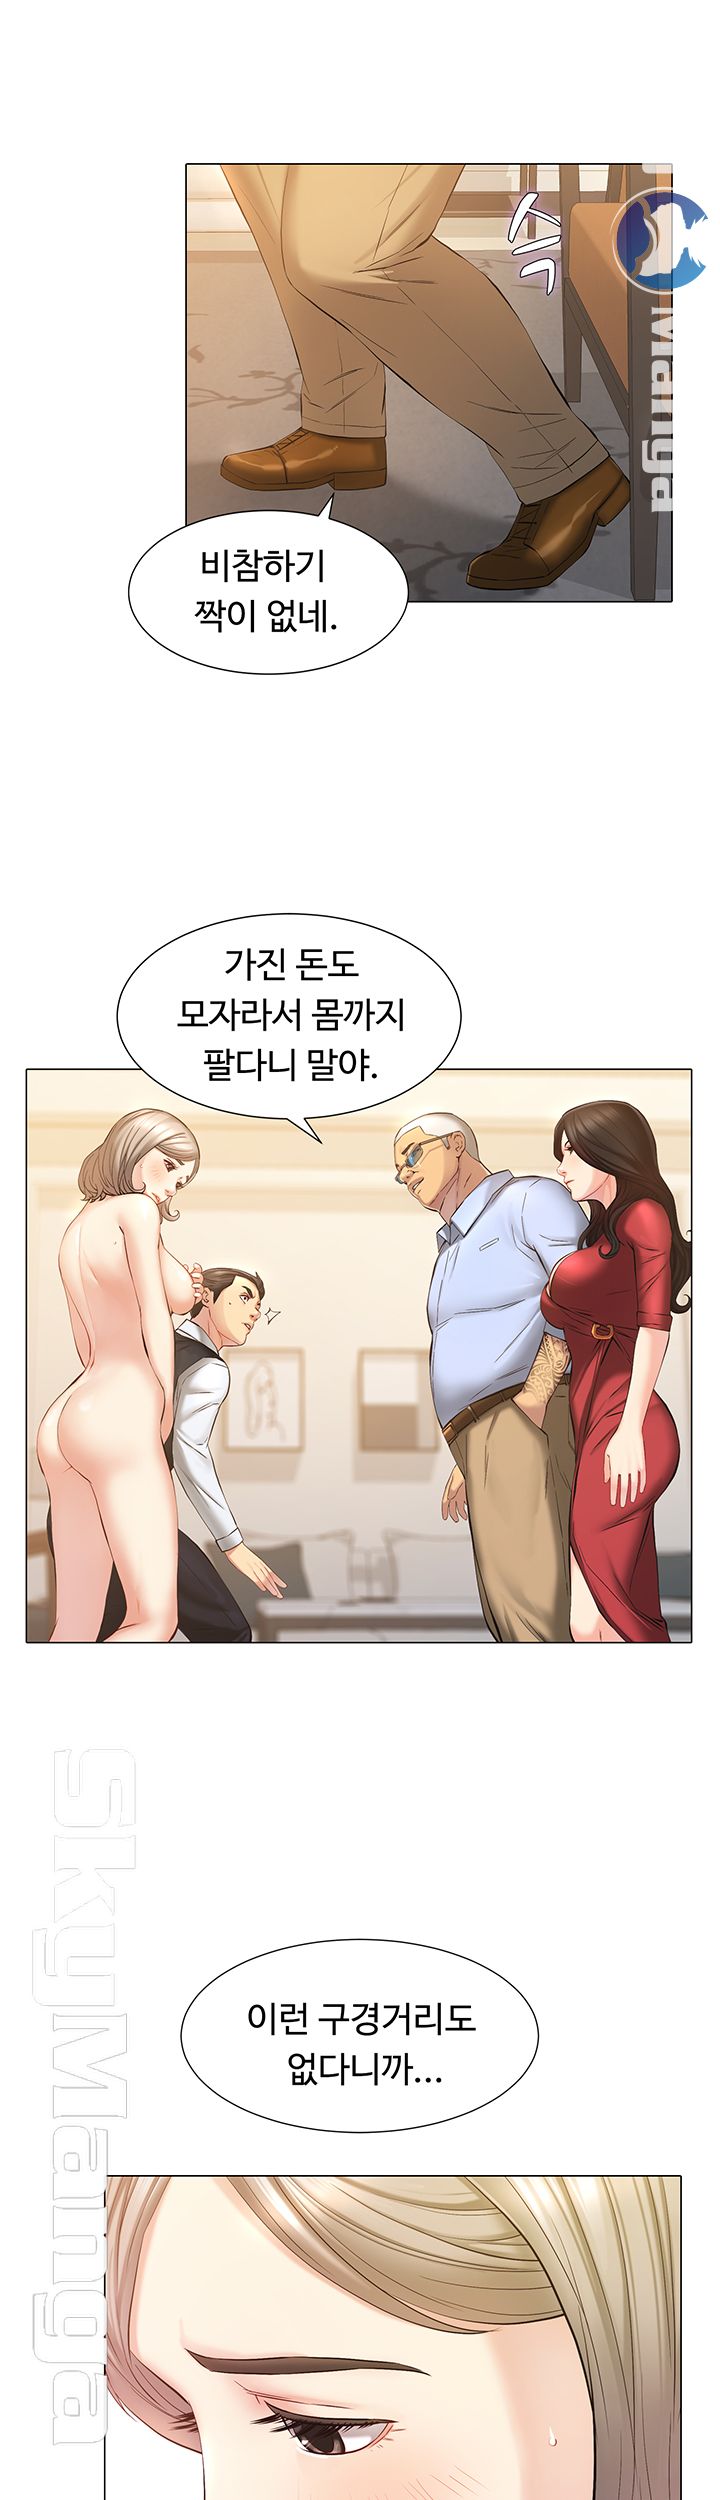 Gamble Raw - Chapter 1 Page 29